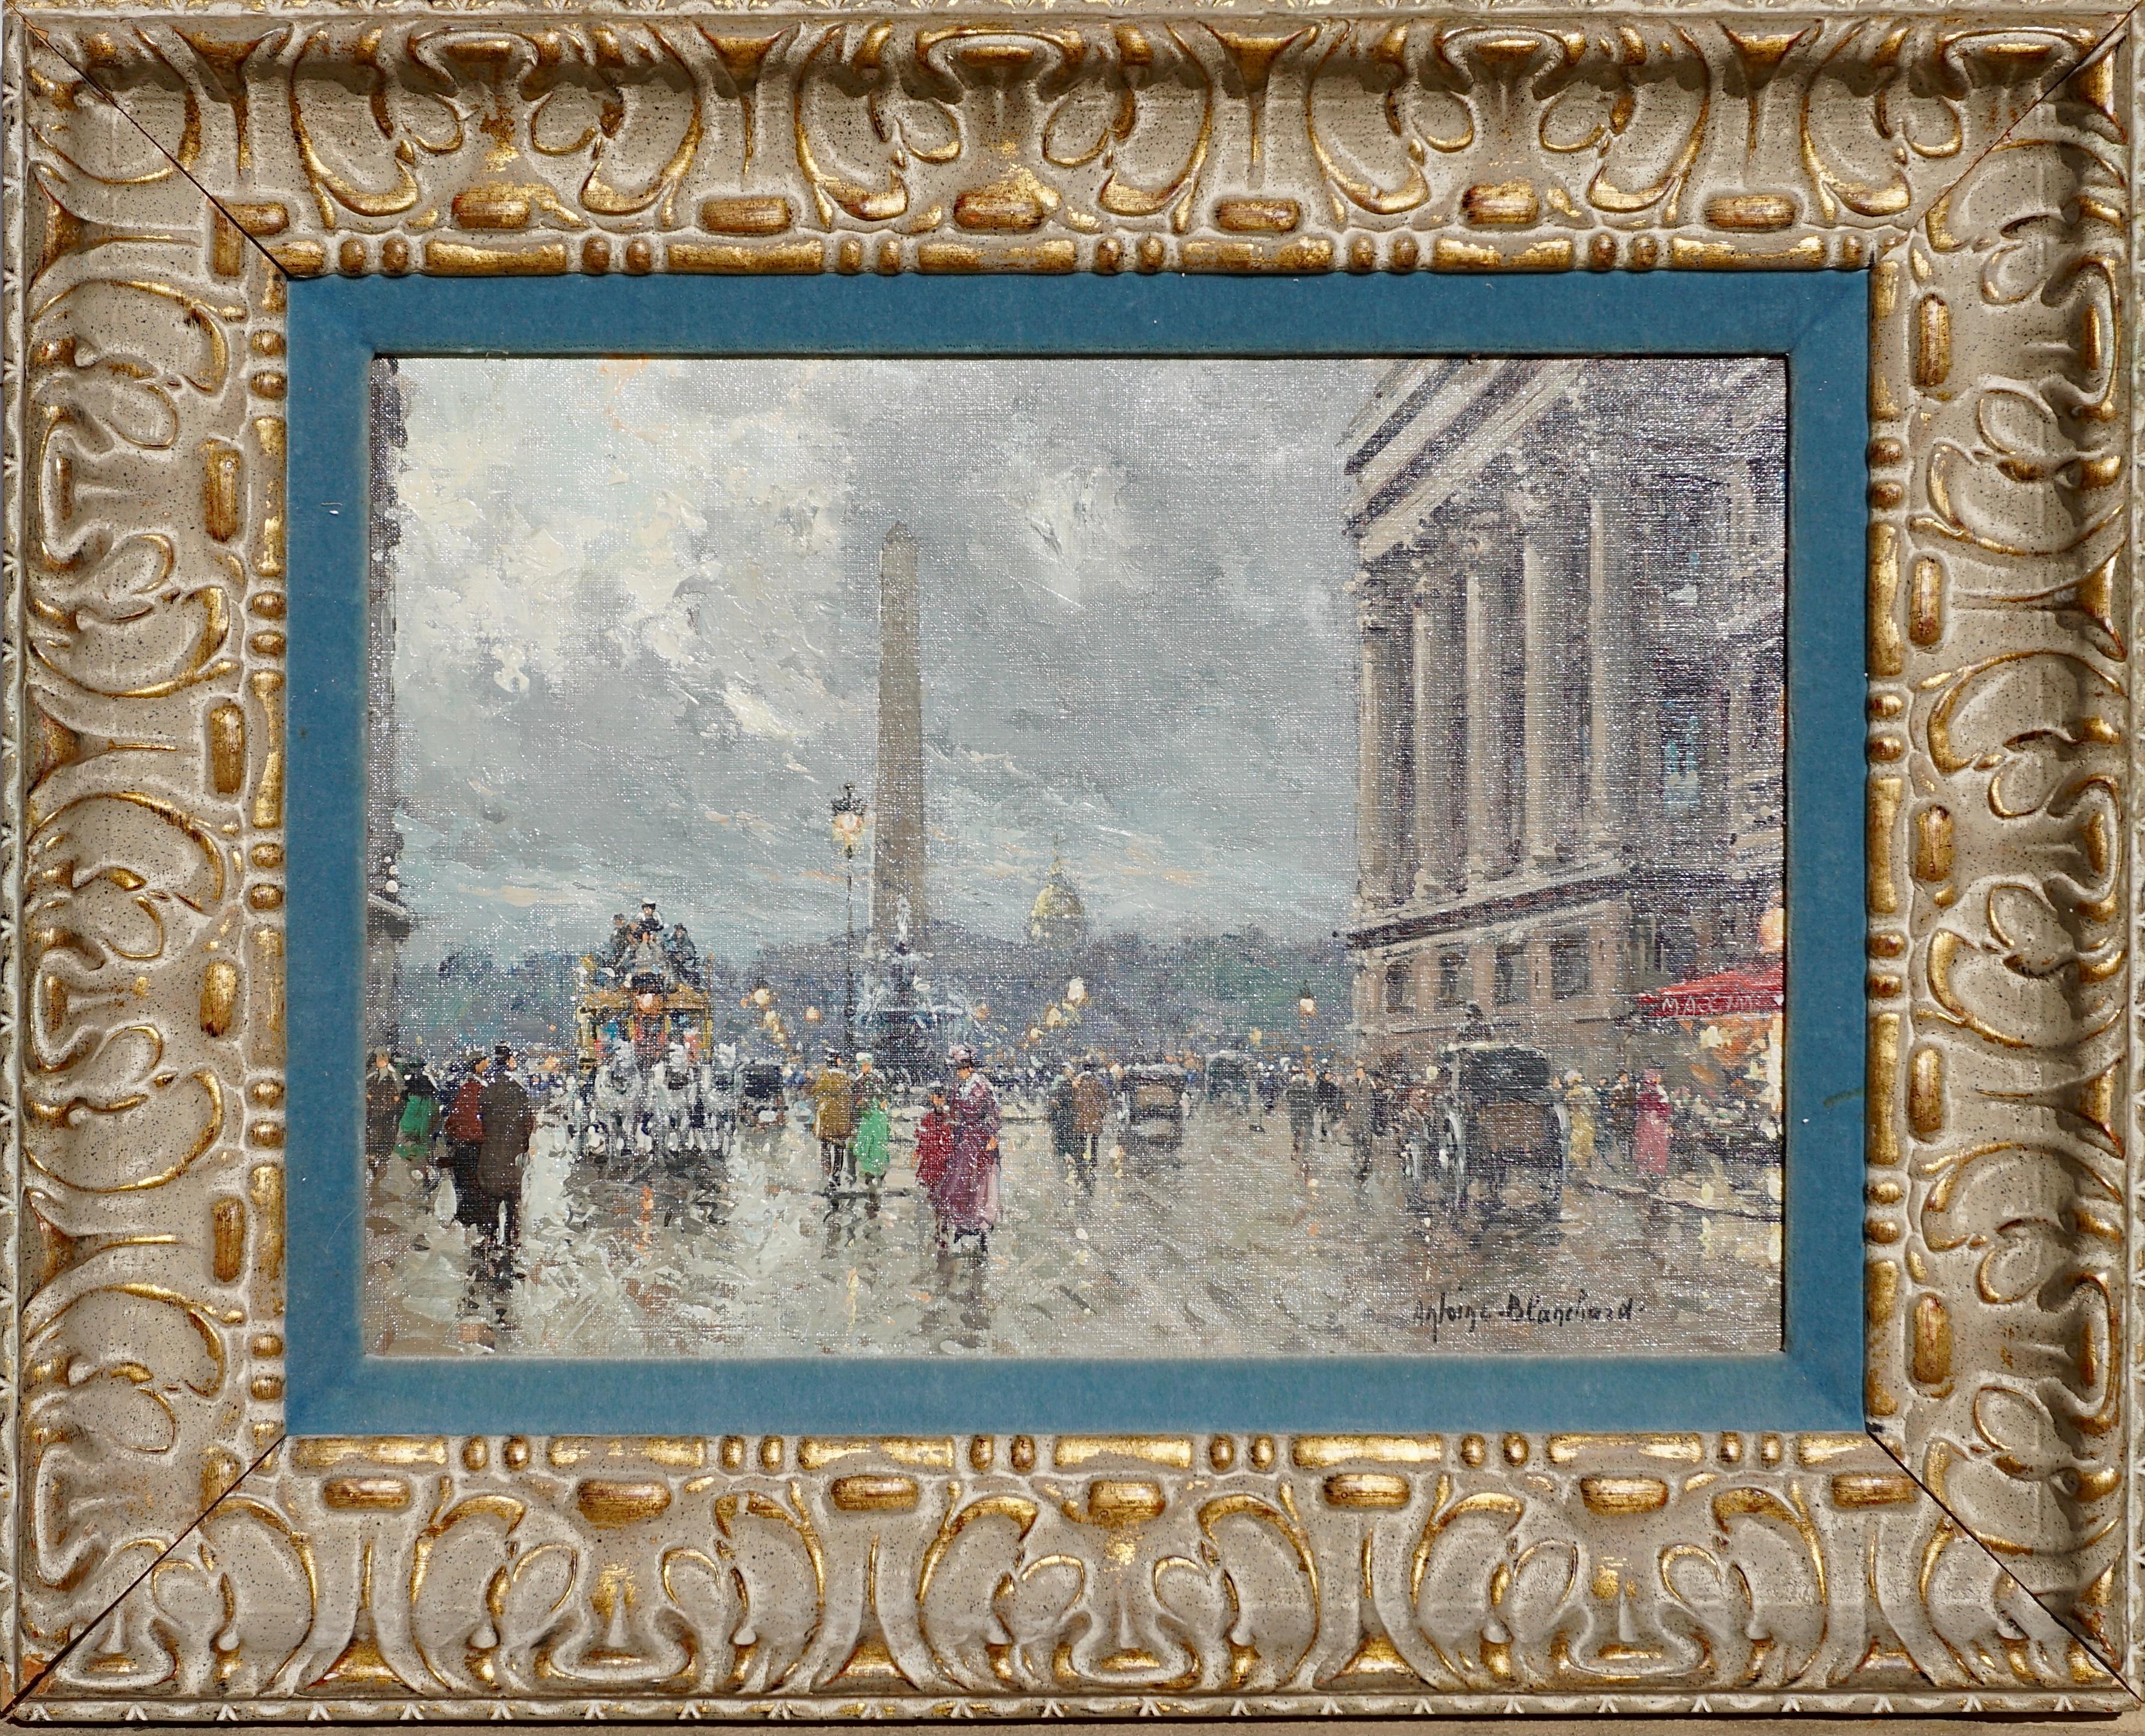 Antoine Blanchard (1910-1988). 
Mid Century Paris Street Scene. Place de la Concorde, 
Dimensions 13 x 18.4 Inches
Framed: 21 x 26 Inches
Oil on canvas 
Signed lower right.”Antoine Blanchard”

This work has been authenticated by Rehs